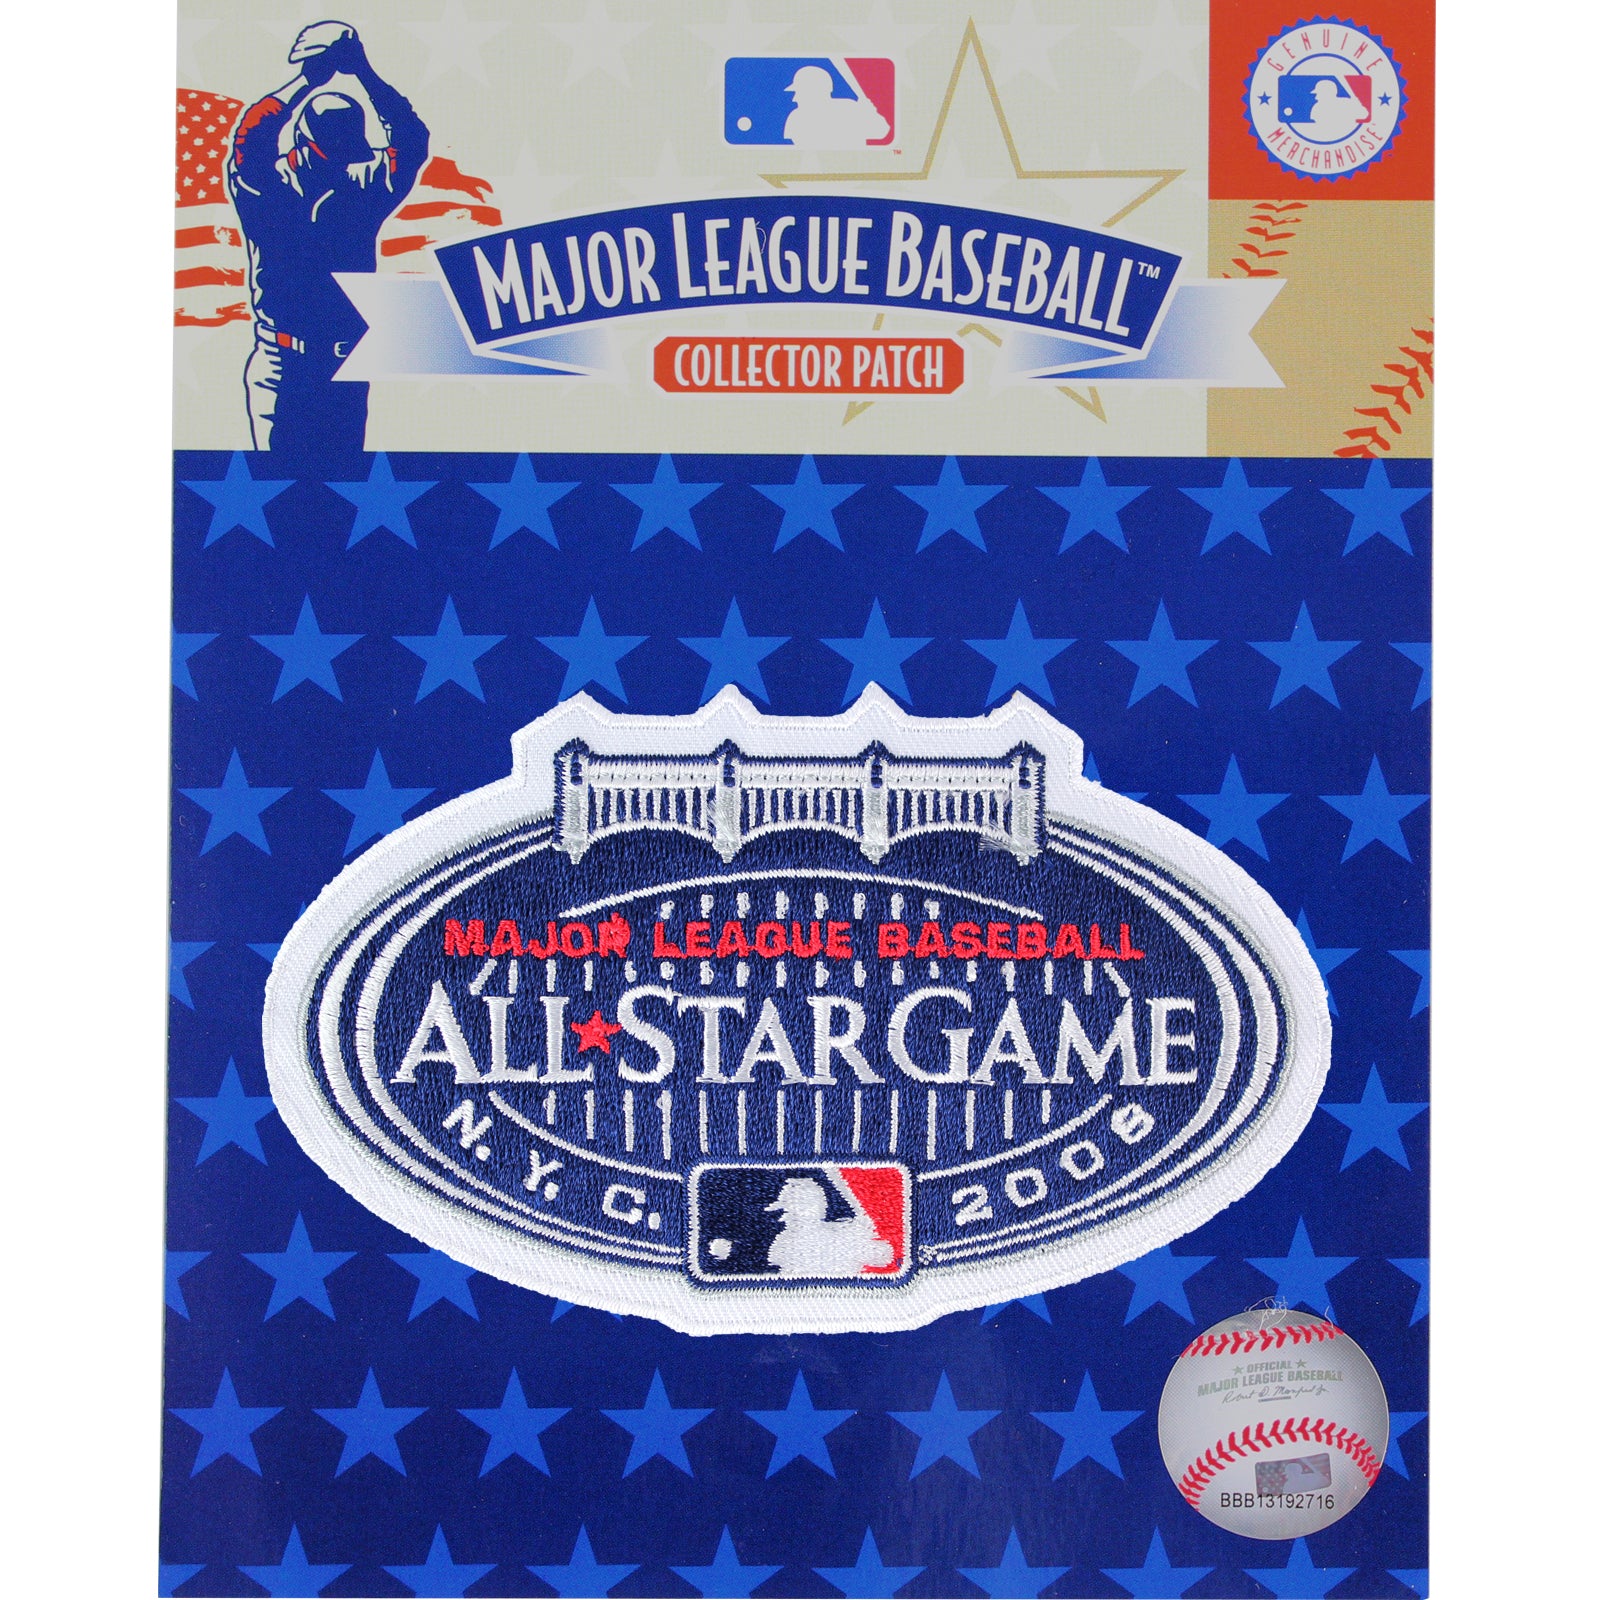 2022 MLB All Star Game Embroidered Jersey Patch Los Angeles Dodgers